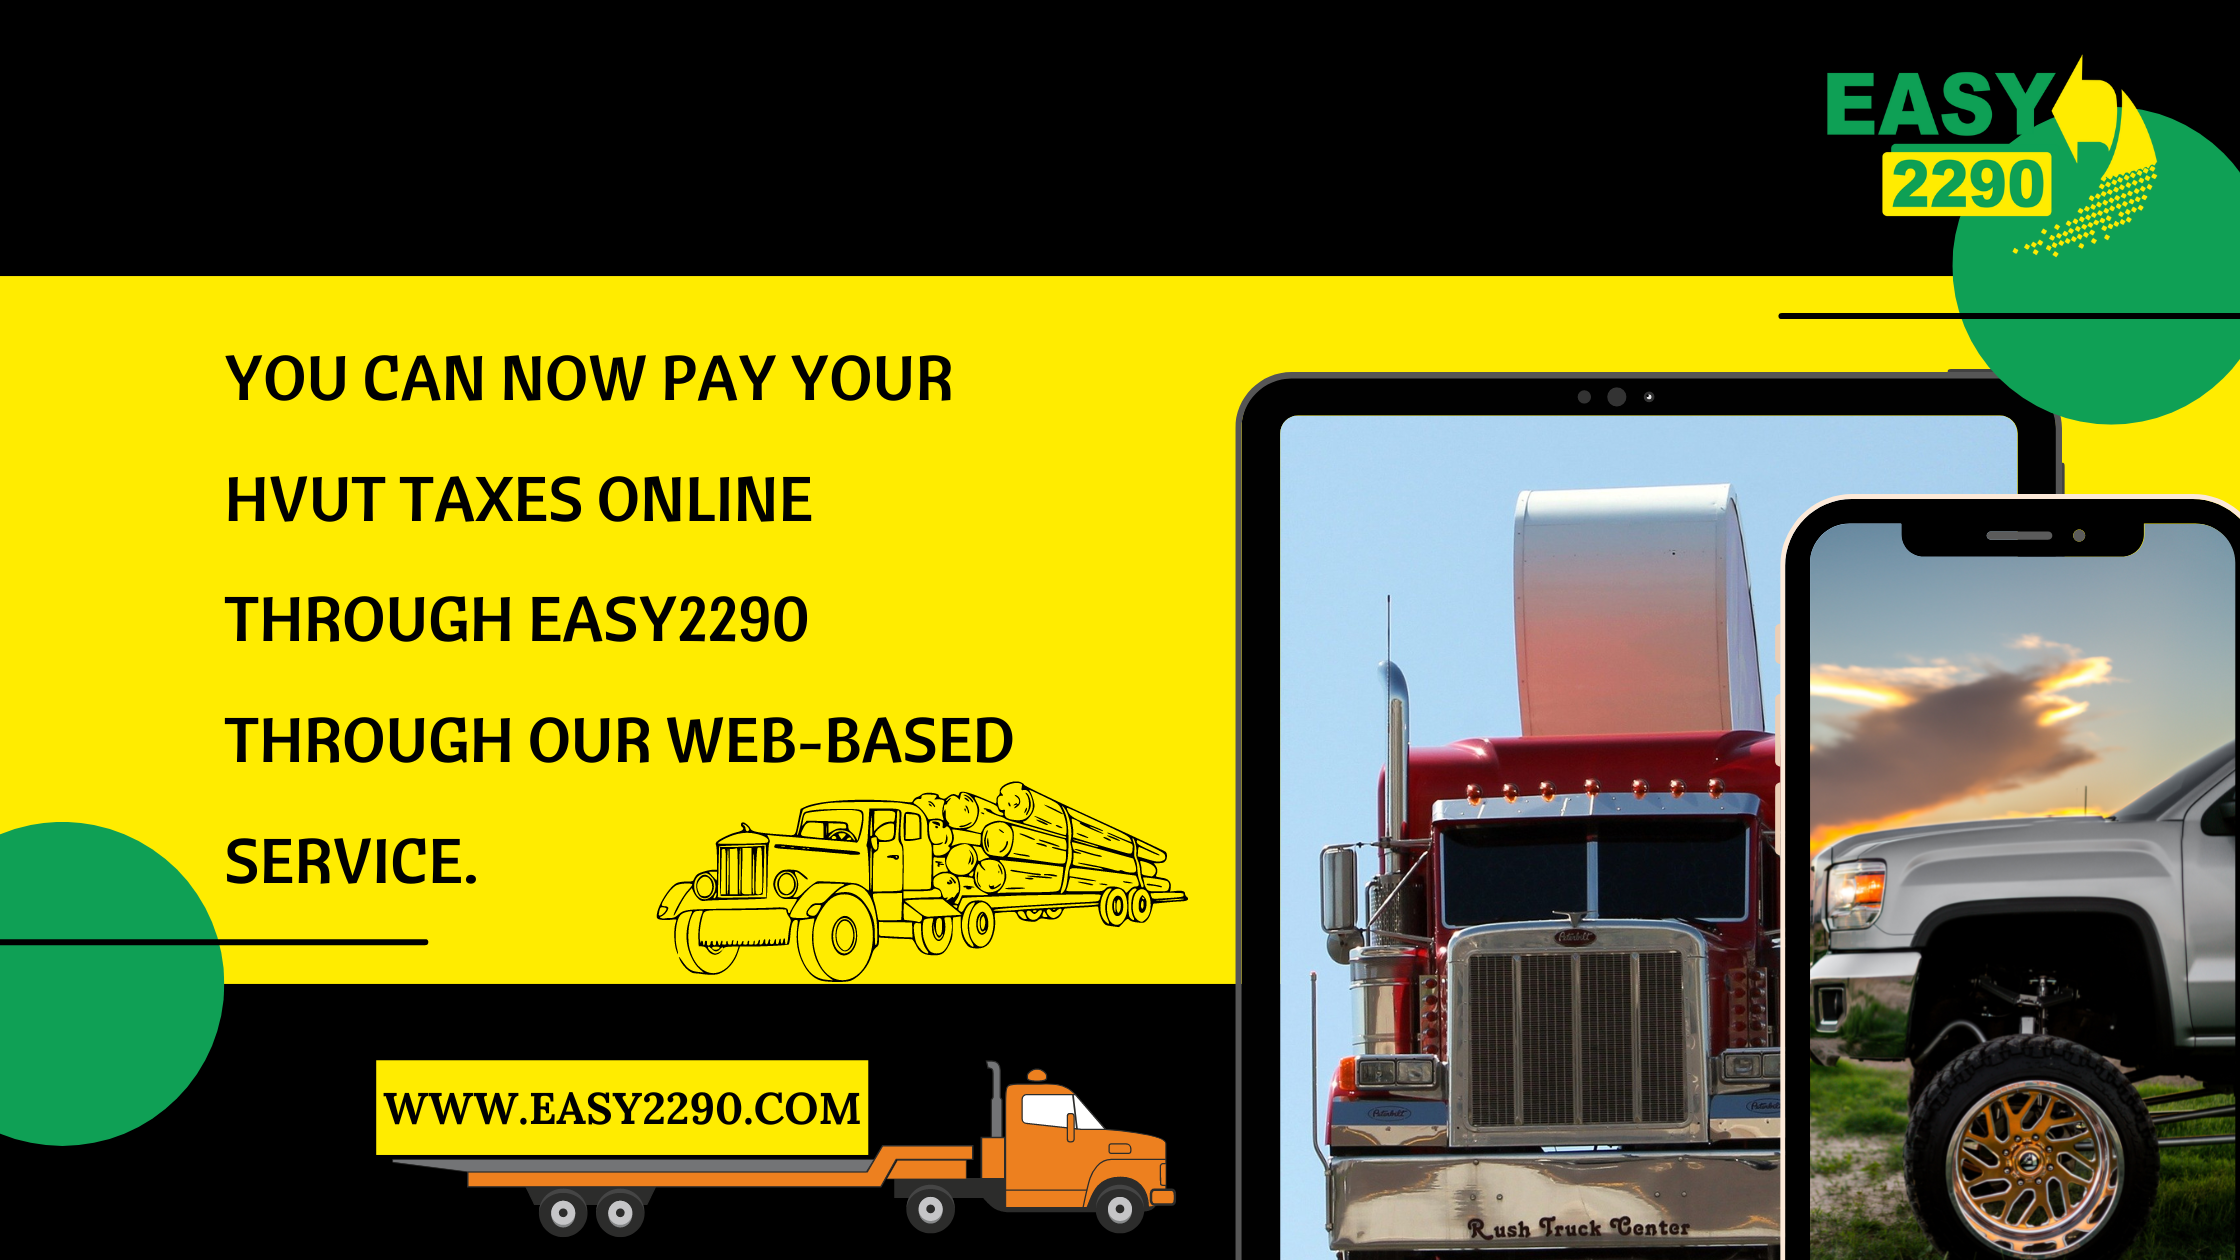 You can now pay your HVUT taxes online through Easy2290 through our web-based service.